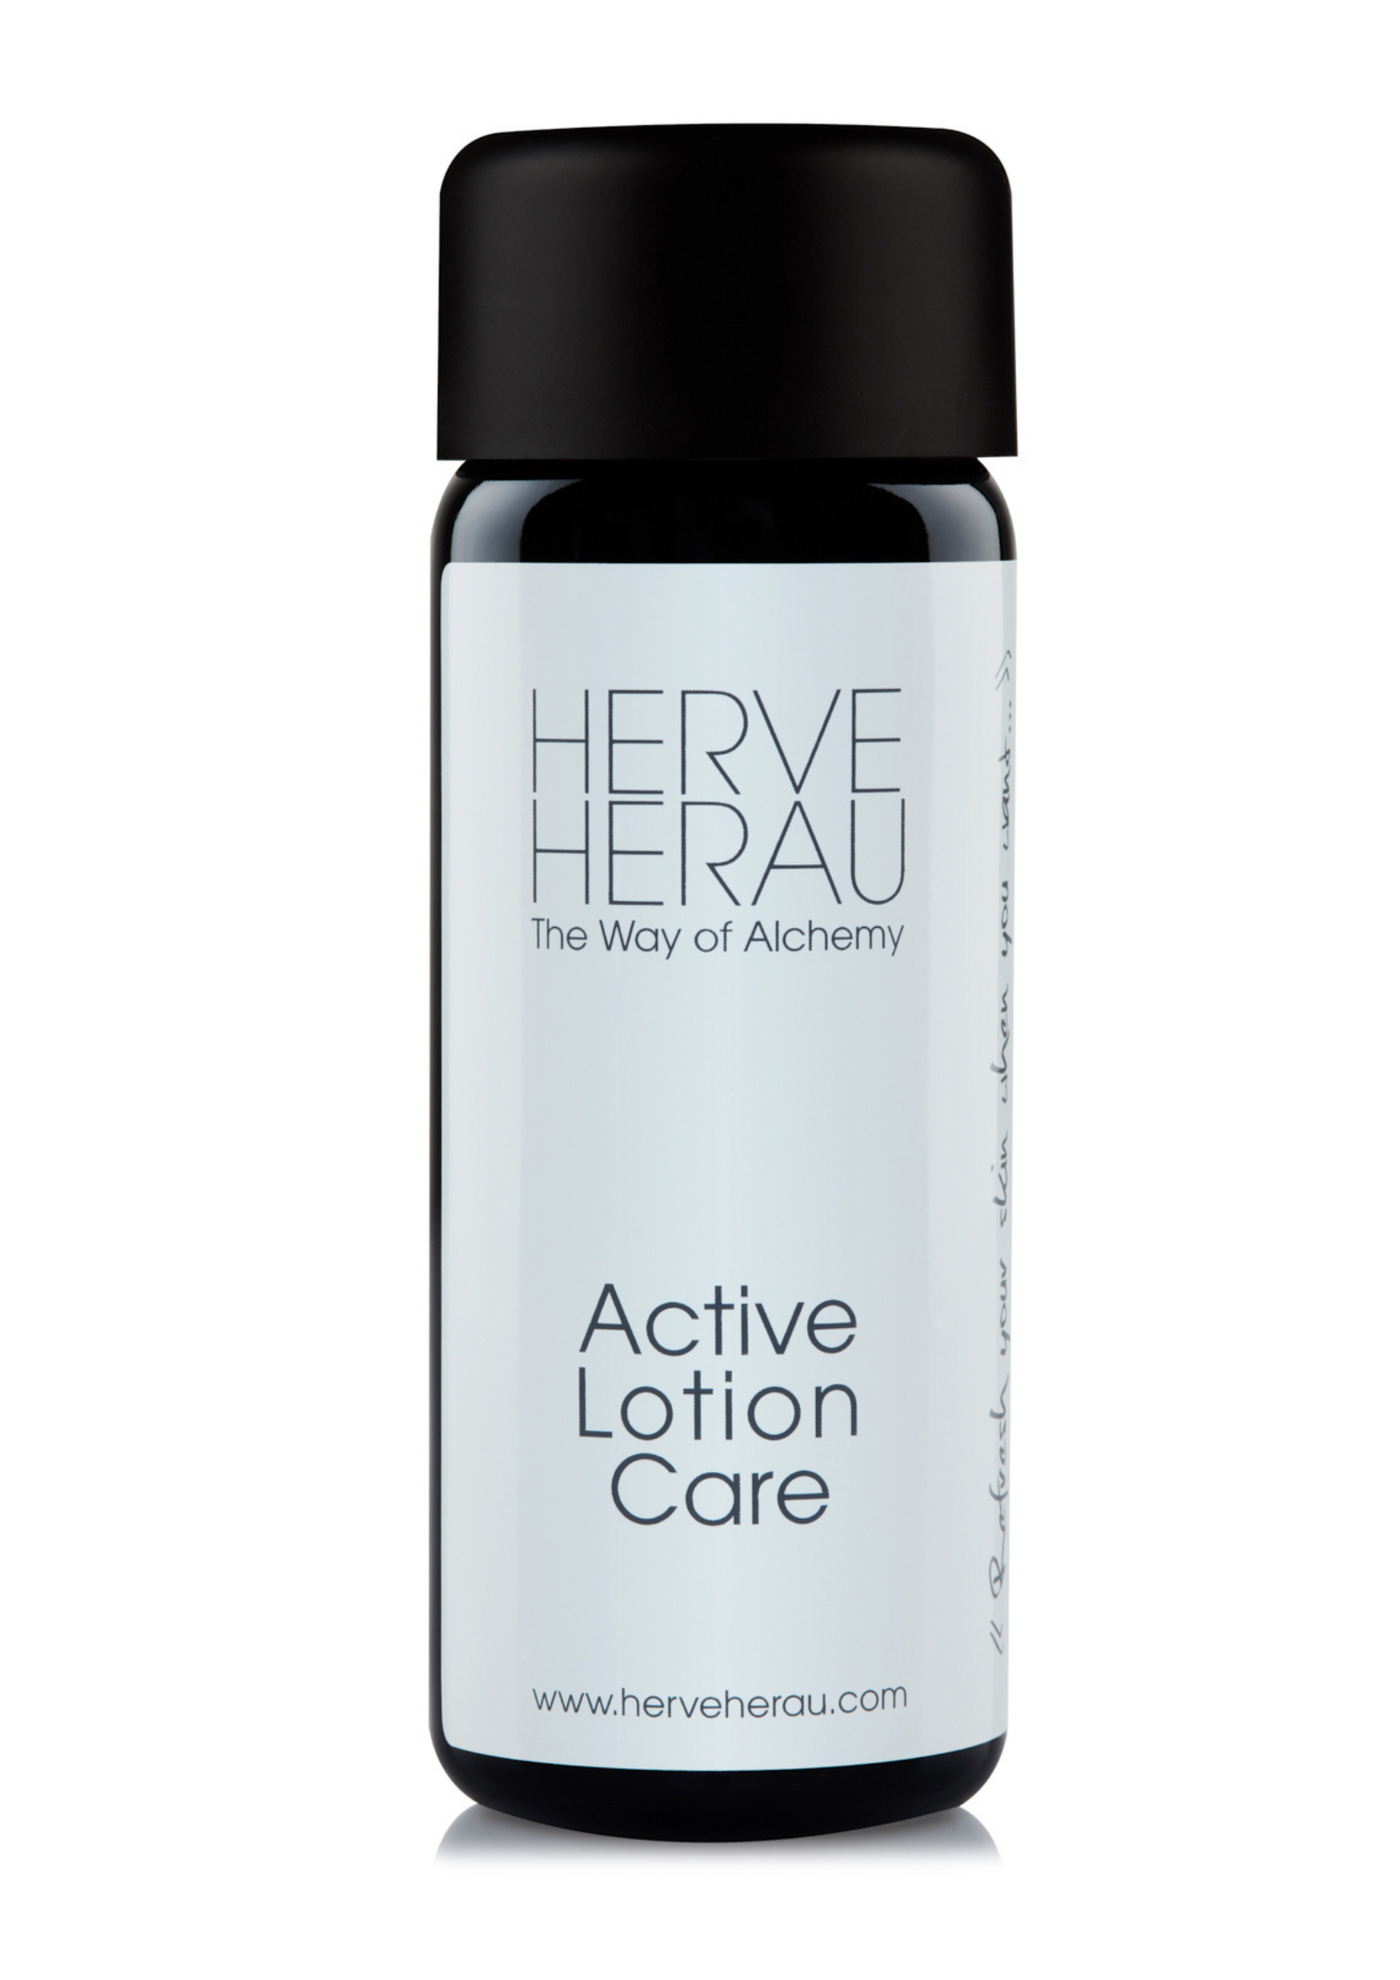 Active Lotion Care